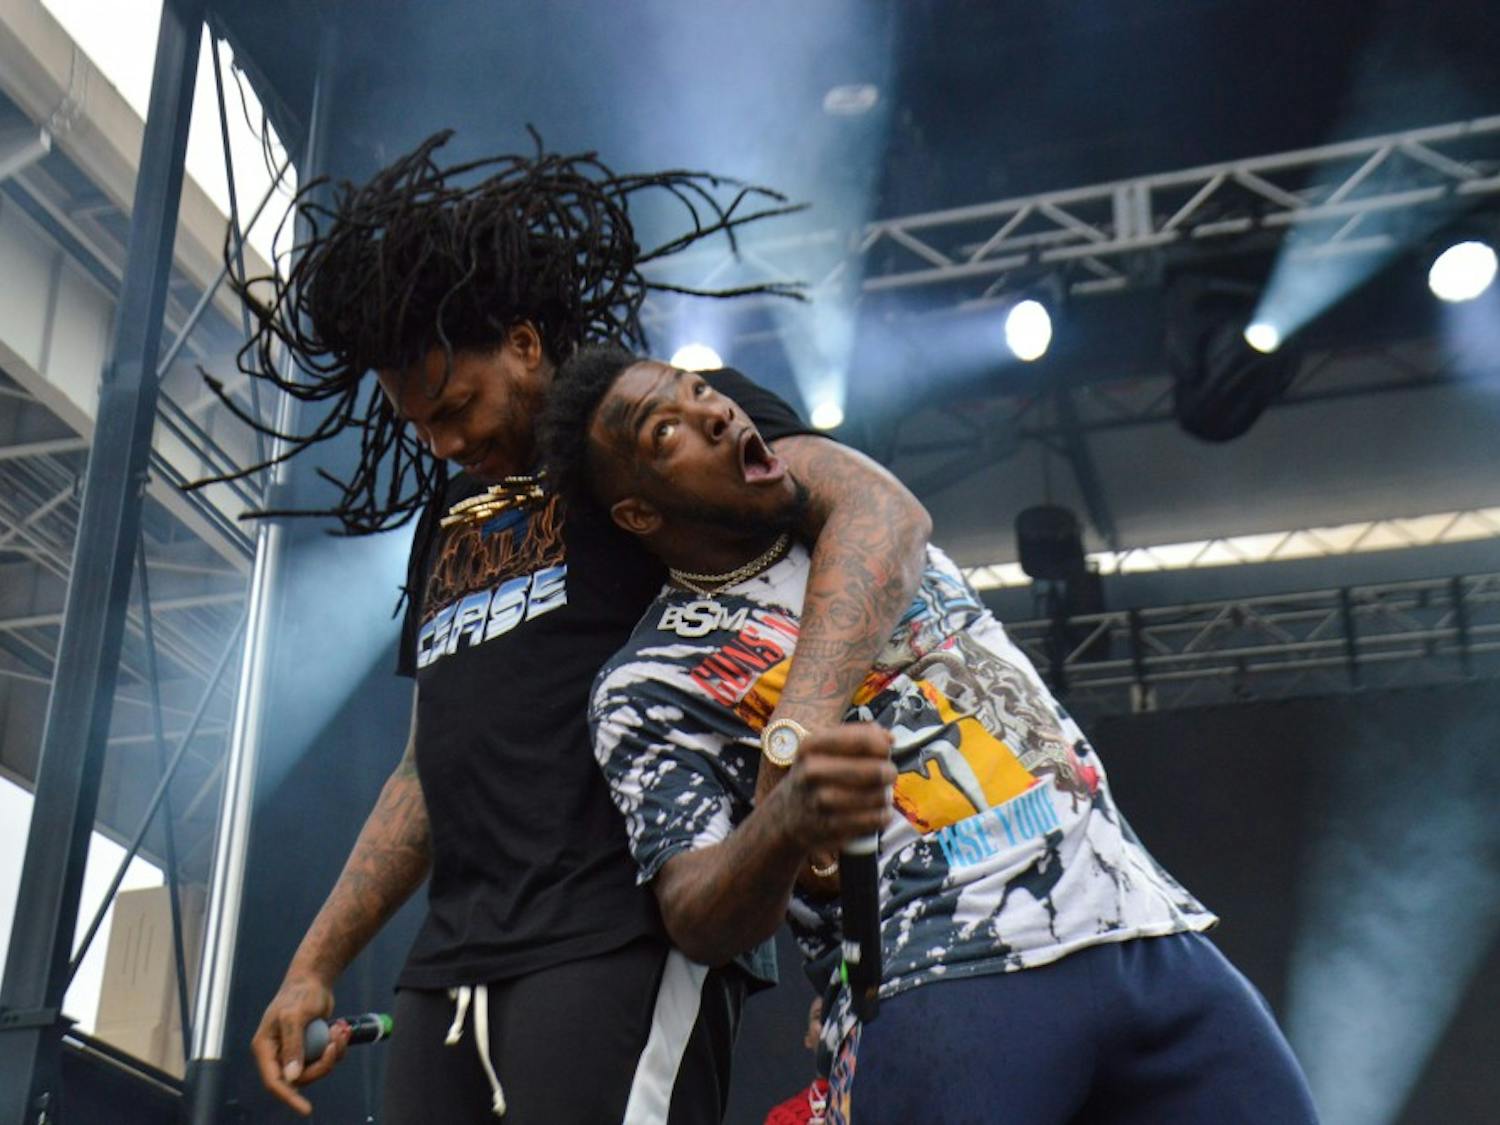 Rapper Waka Flocka Flame (left) put on the most audience-involved performance of the night. Flocka and his hype man bounced around the stage, showering fans with champagne and water.